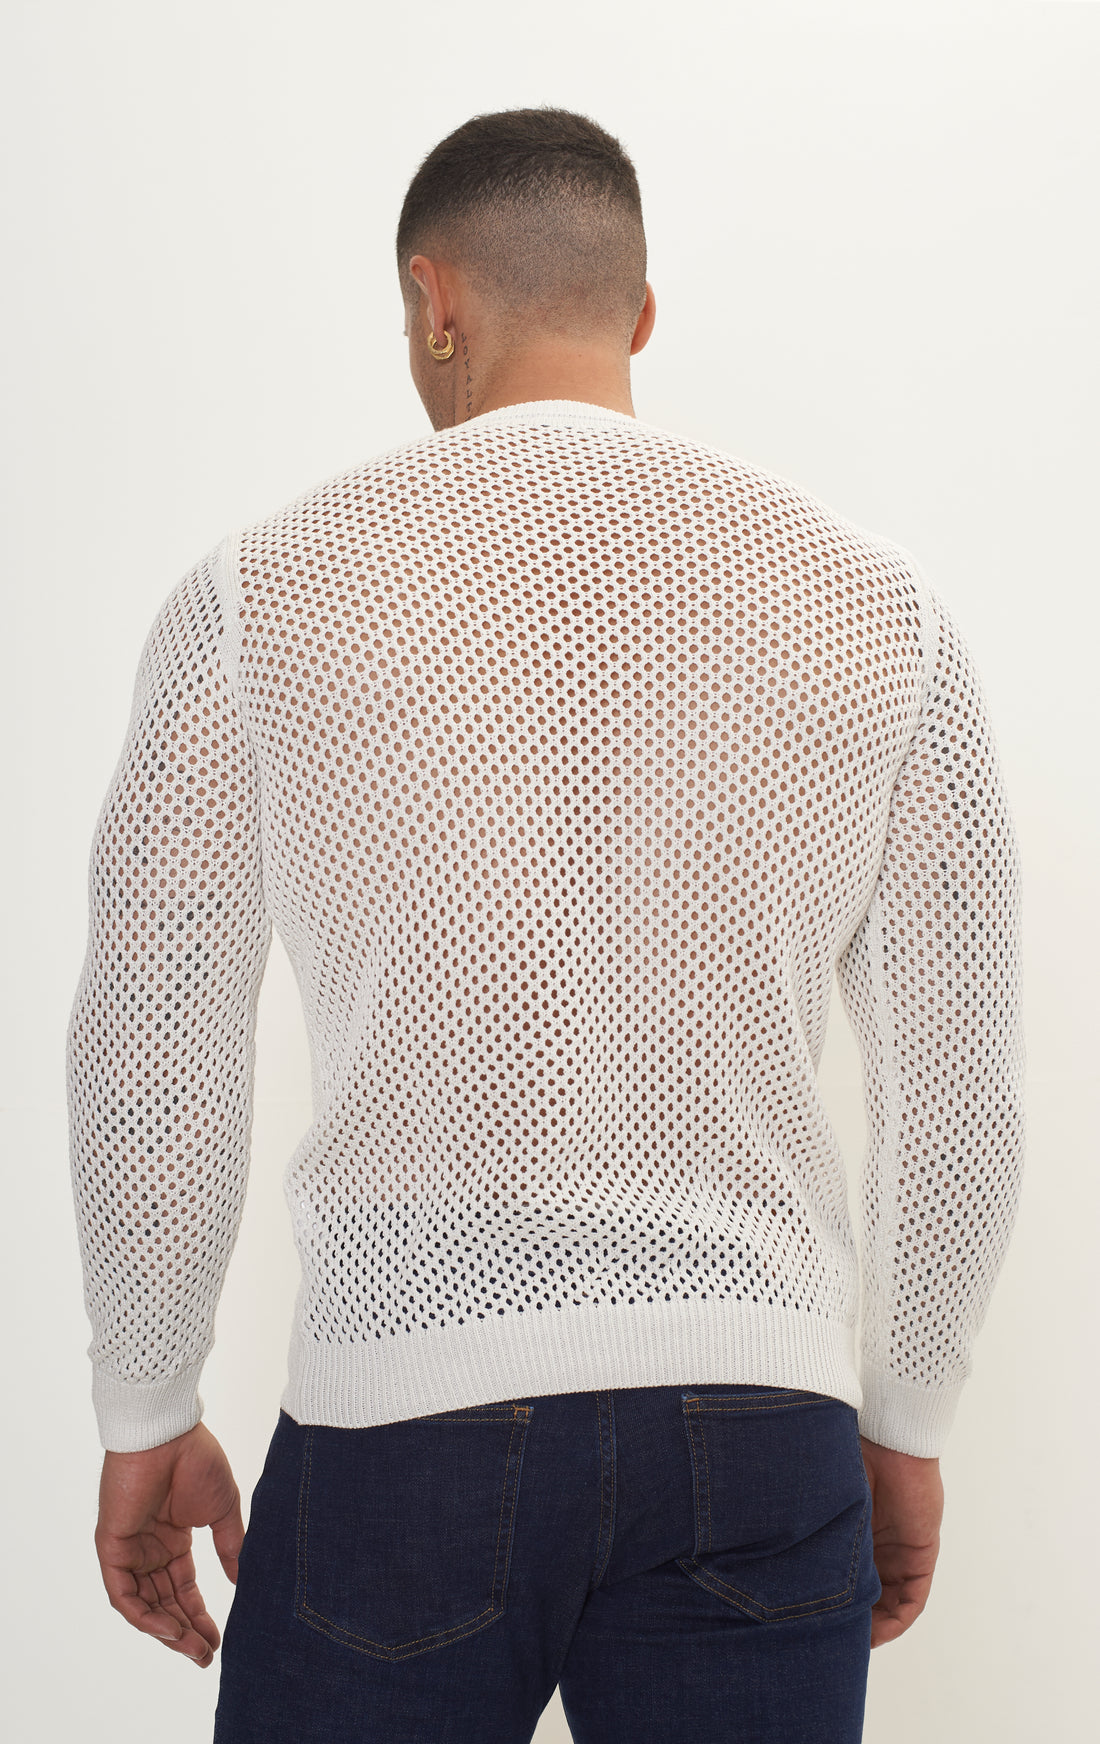 See Through Fishnet Muscle Fit Shirt - Off White